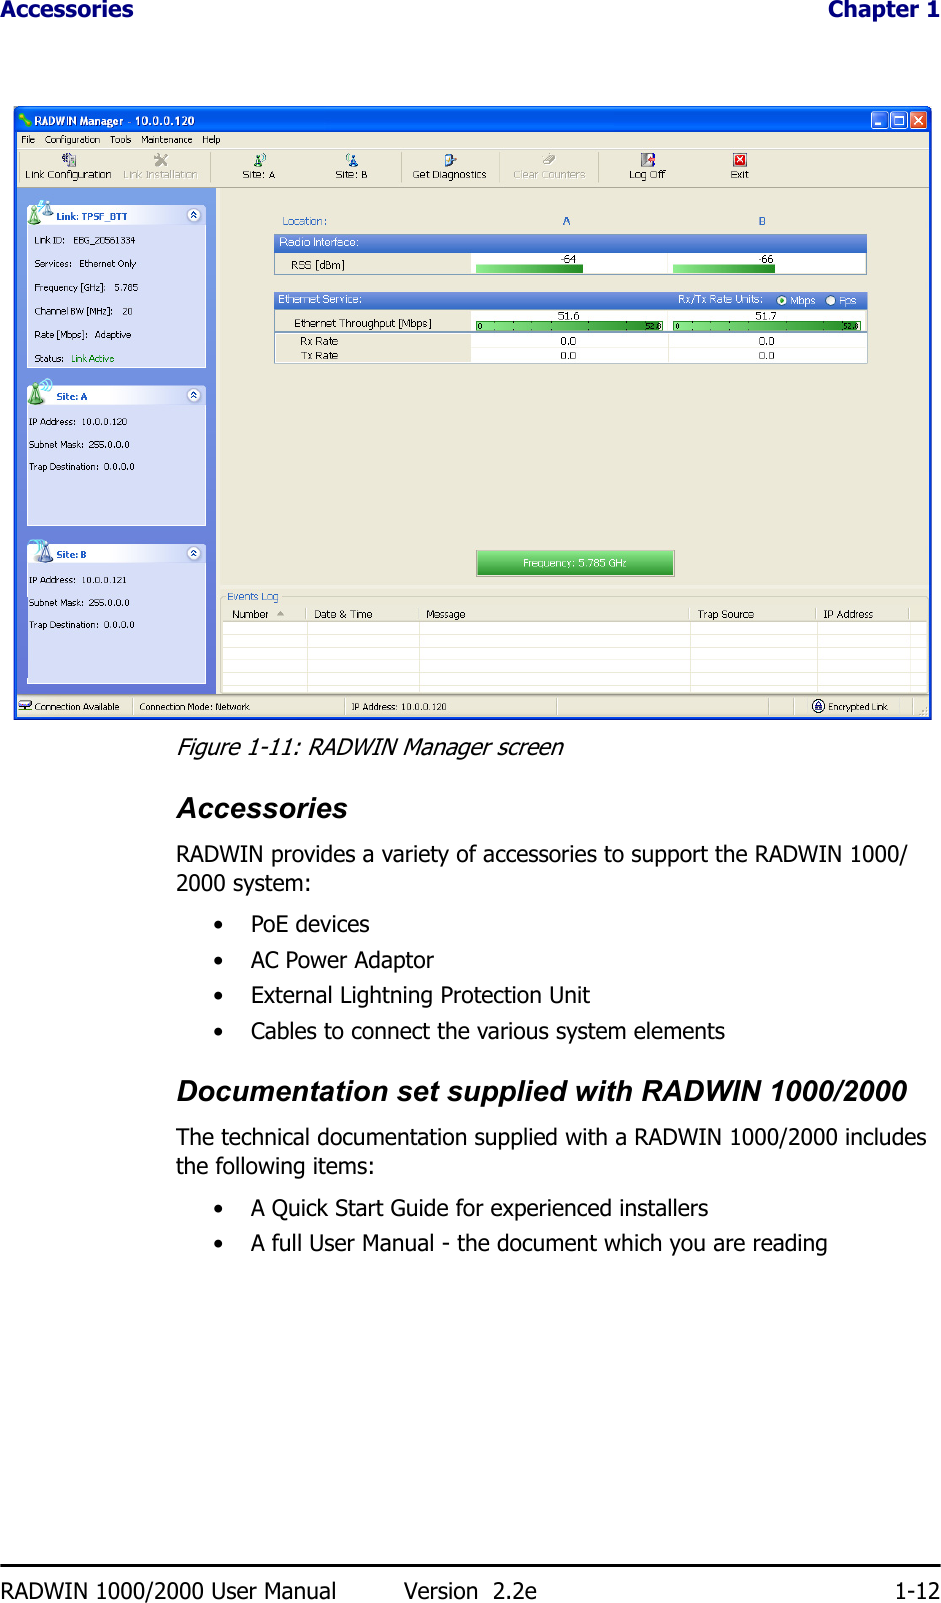 Accessories  Chapter 1RADWIN 1000/2000 User Manual Version  2.2e 1-12Figure 1-11: RADWIN Manager screenAccessoriesRADWIN provides a variety of accessories to support the RADWIN 1000/2000 system:•PoE devices•AC Power Adaptor• External Lightning Protection Unit• Cables to connect the various system elementsDocumentation set supplied with RADWIN 1000/2000The technical documentation supplied with a RADWIN 1000/2000 includes the following items:• A Quick Start Guide for experienced installers• A full User Manual - the document which you are reading